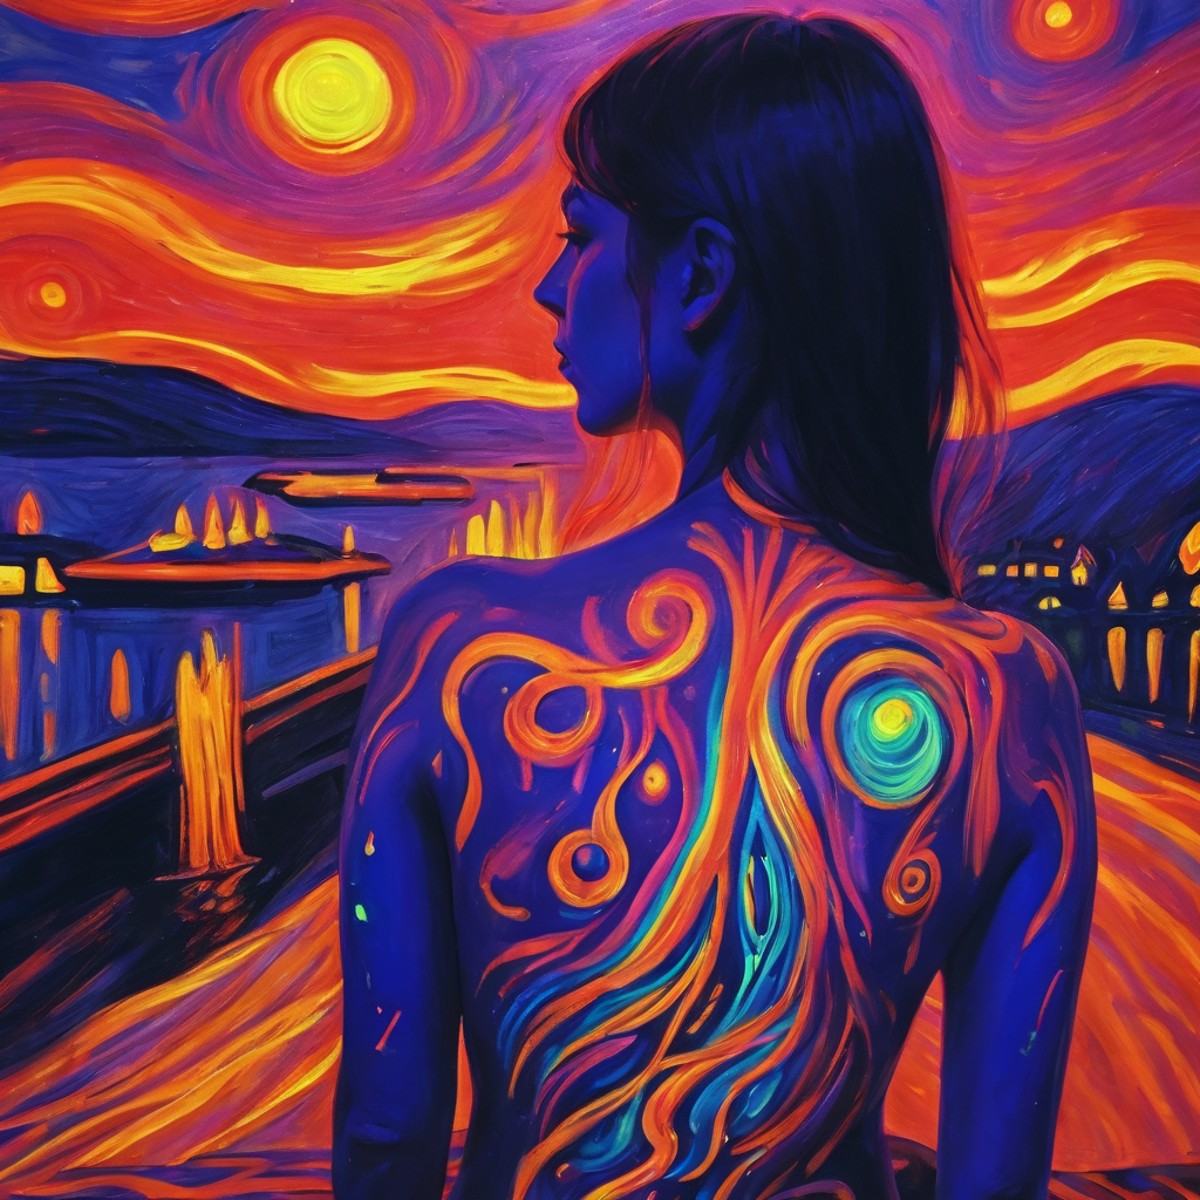 blacklight uv painted on the back of a girl depicting art in the style of Edvard Munch